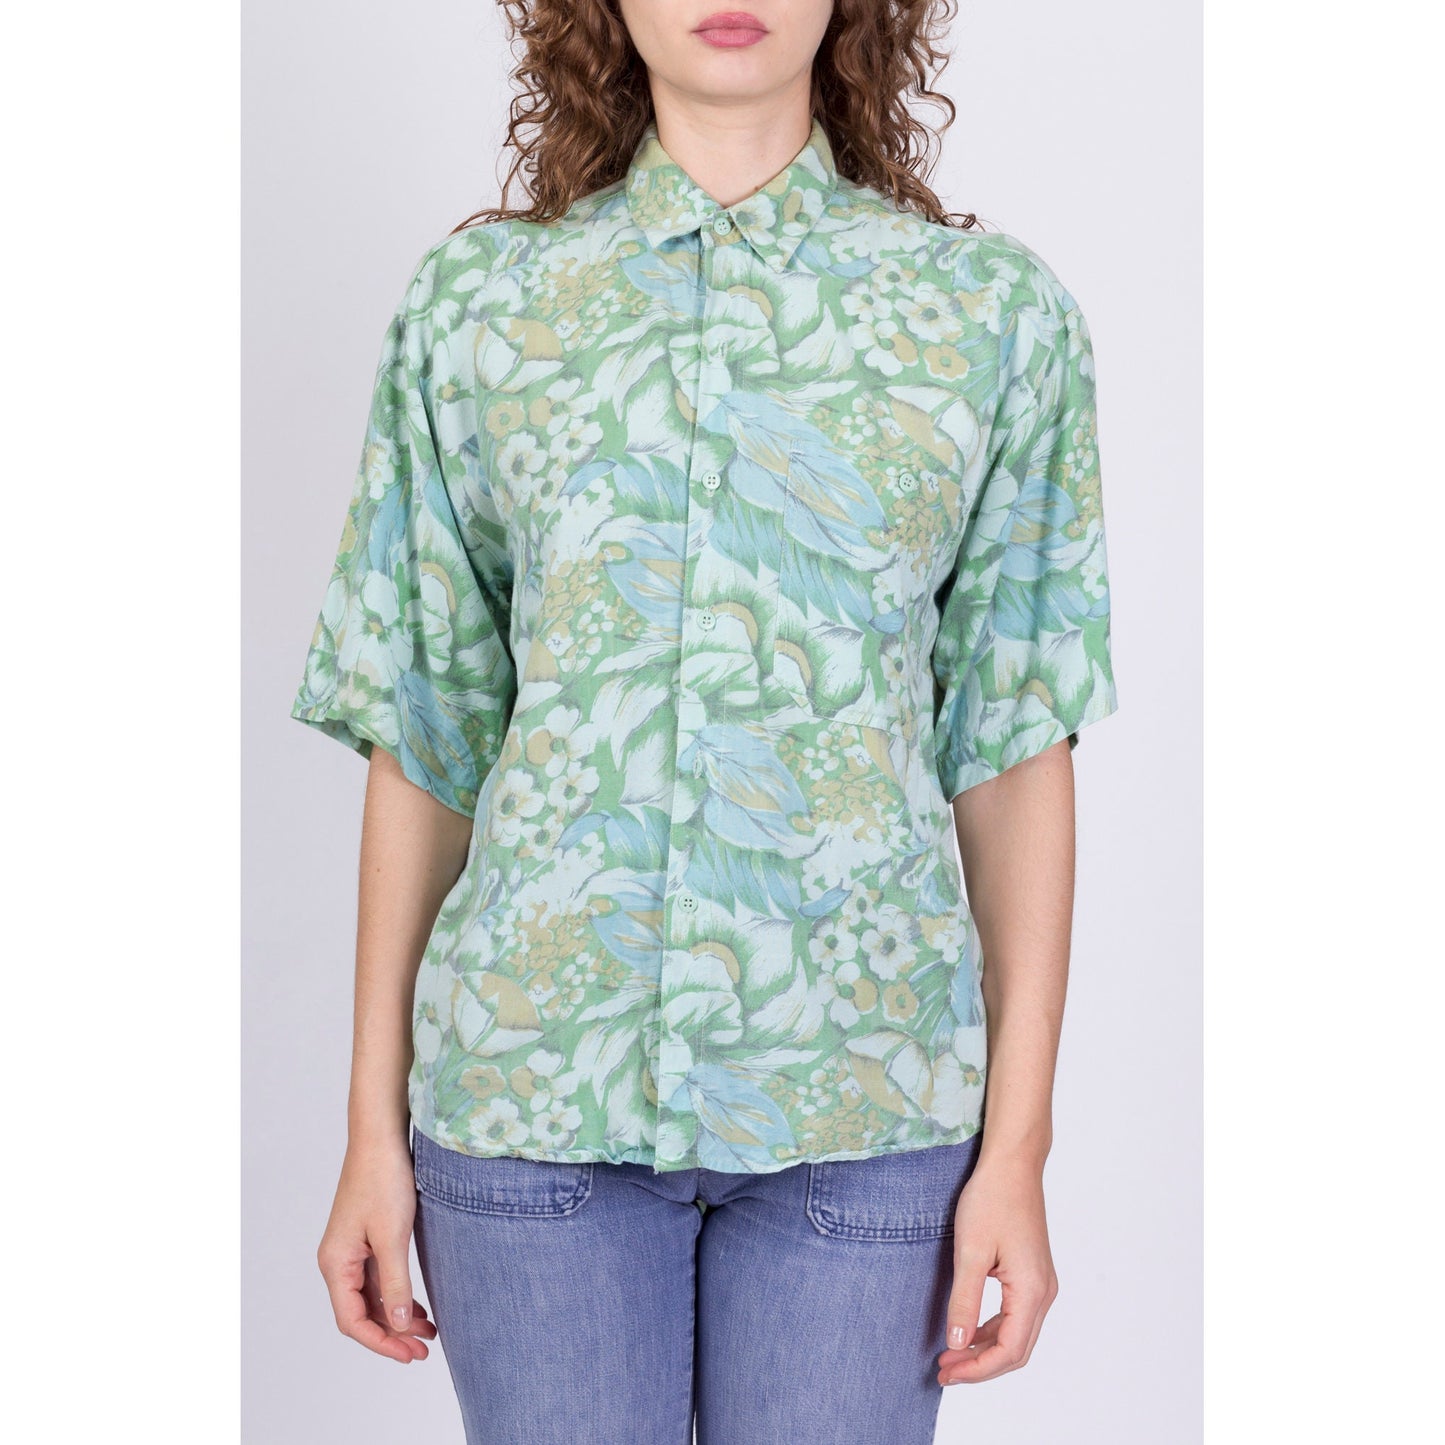 90s Green Floral Rayon Shirt - Large 